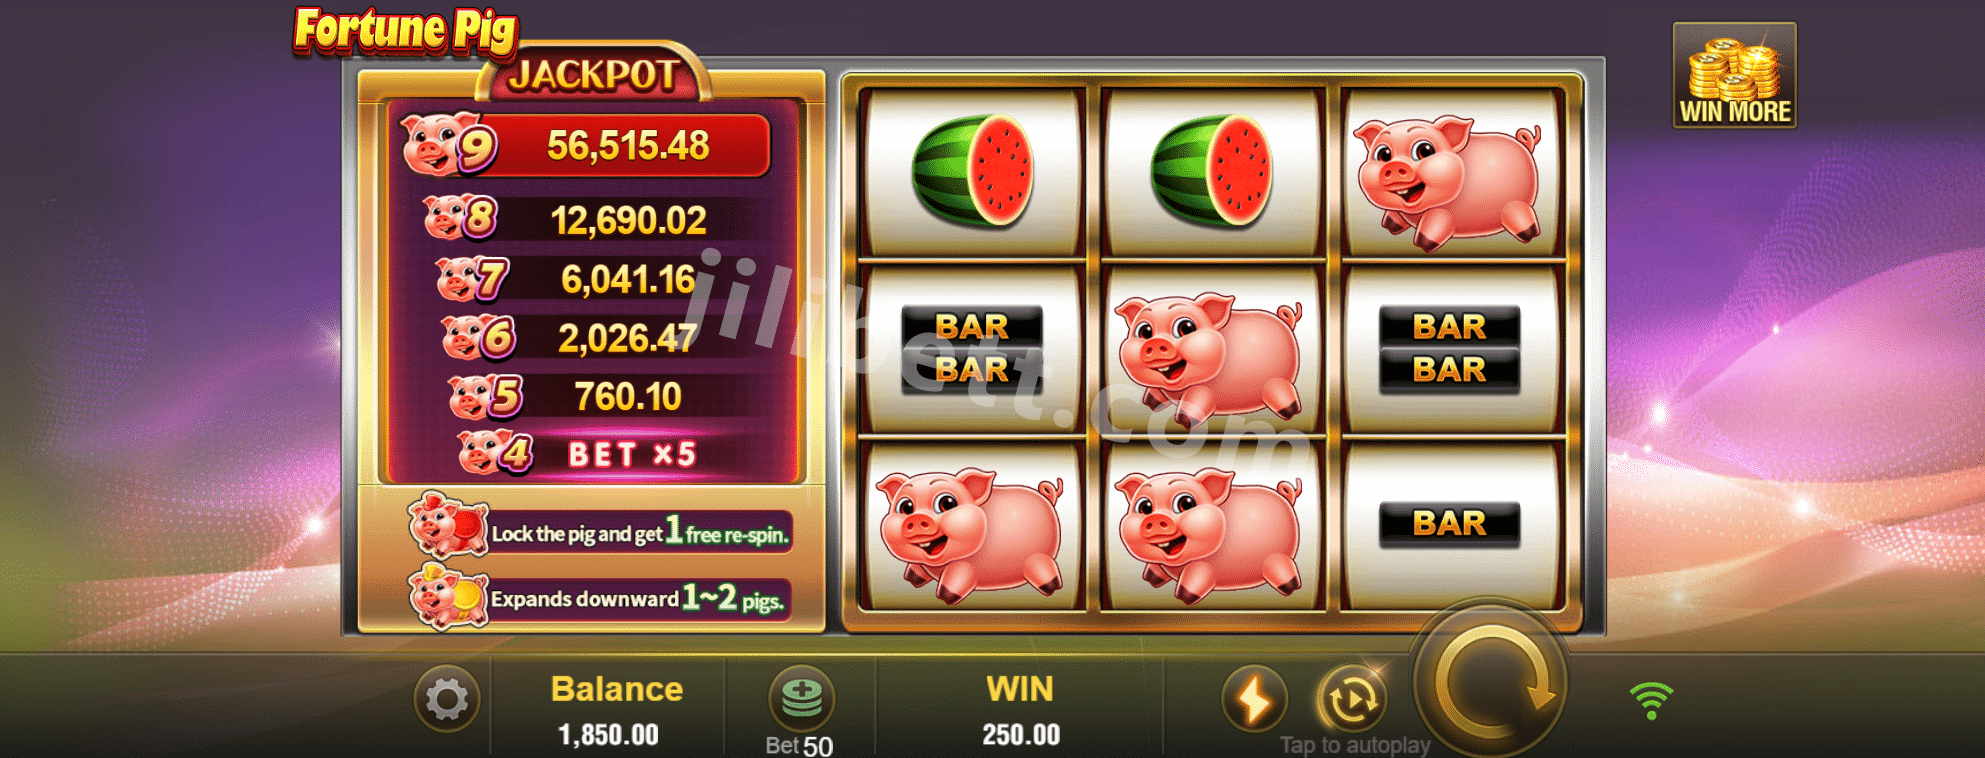 Fortune Pig Interface